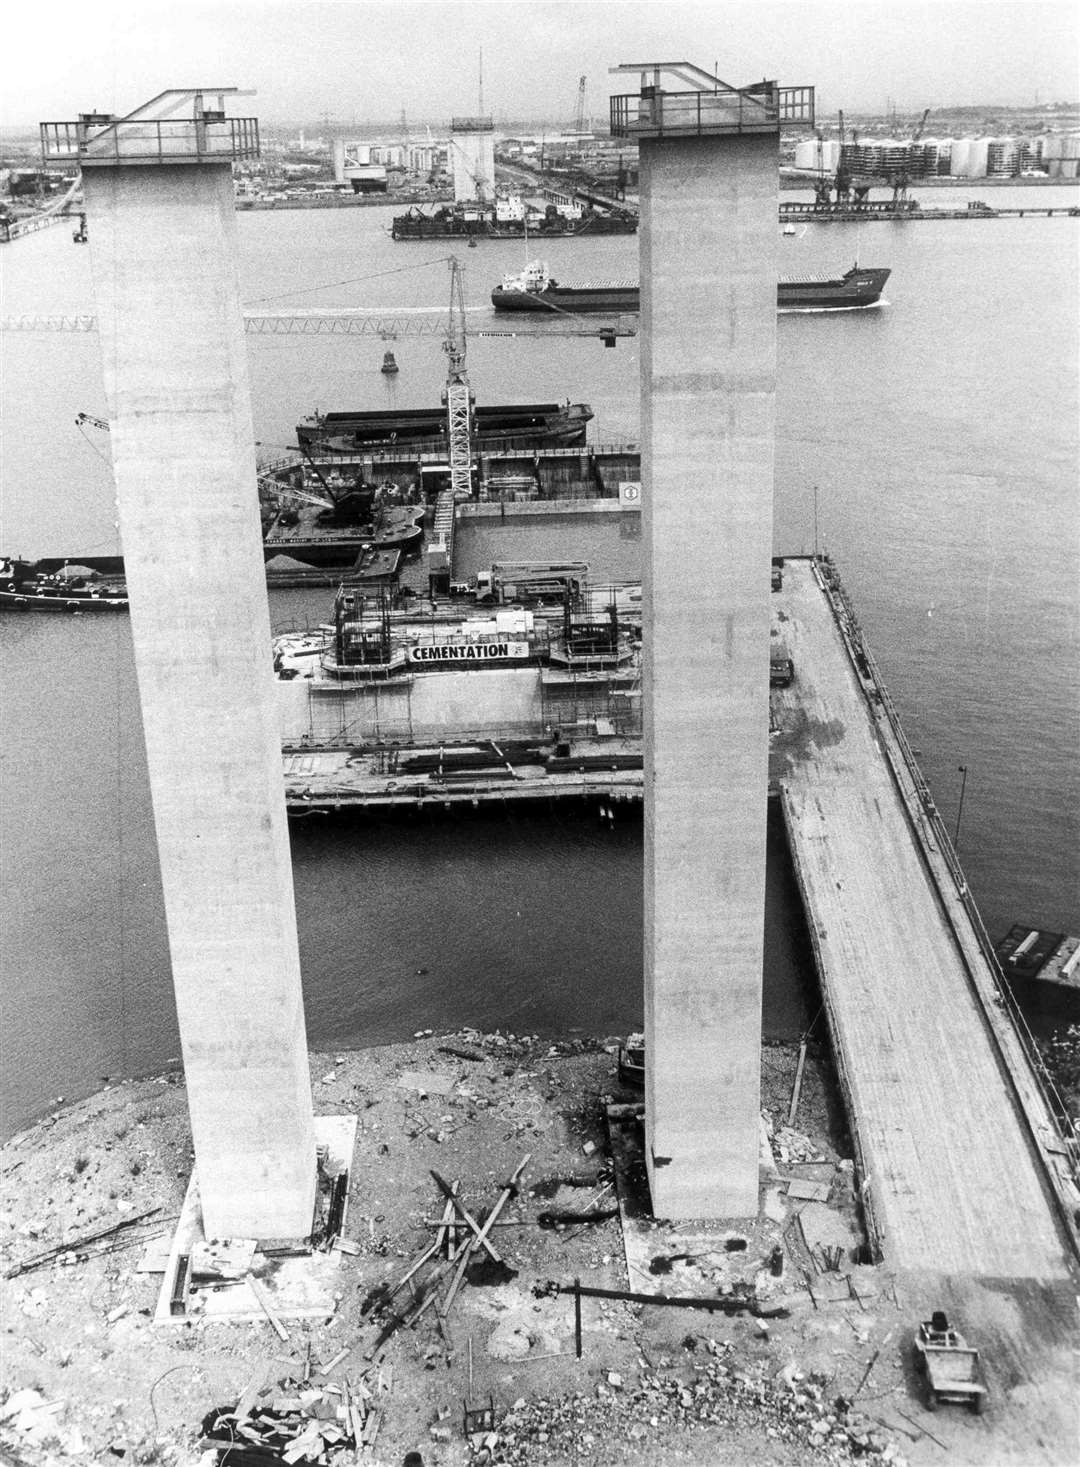 Construction of the Queen Elizabeth bridge in 1989. Two 25-metre concrete caissons were sunk into the river bed, capable of withstanding the impact of a 65,000 ton ship